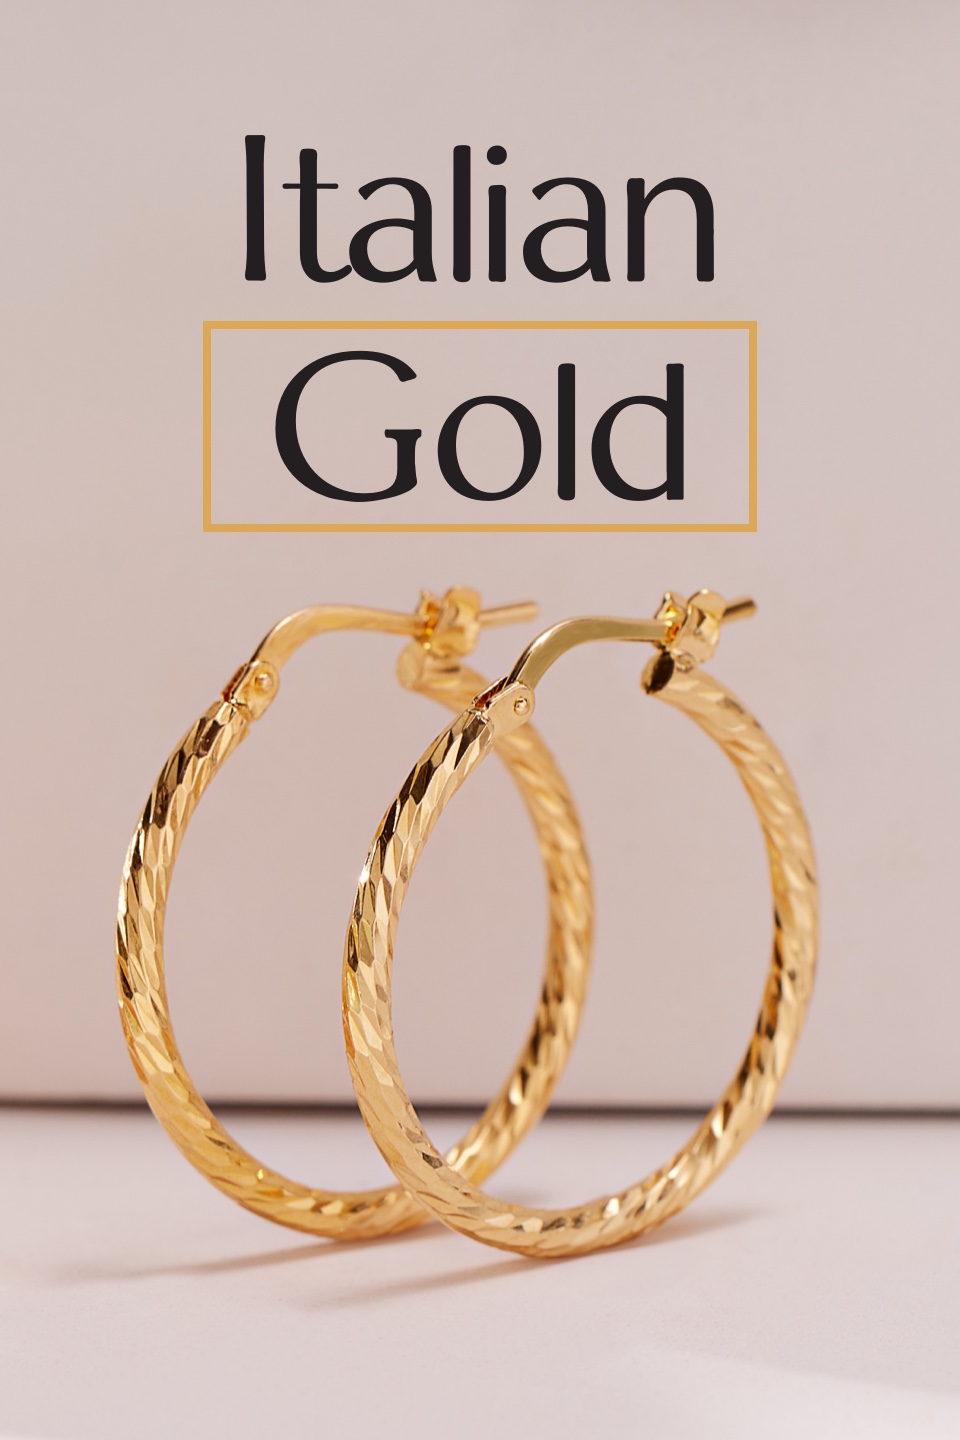 Series Banner for Italian Gold Jewelry